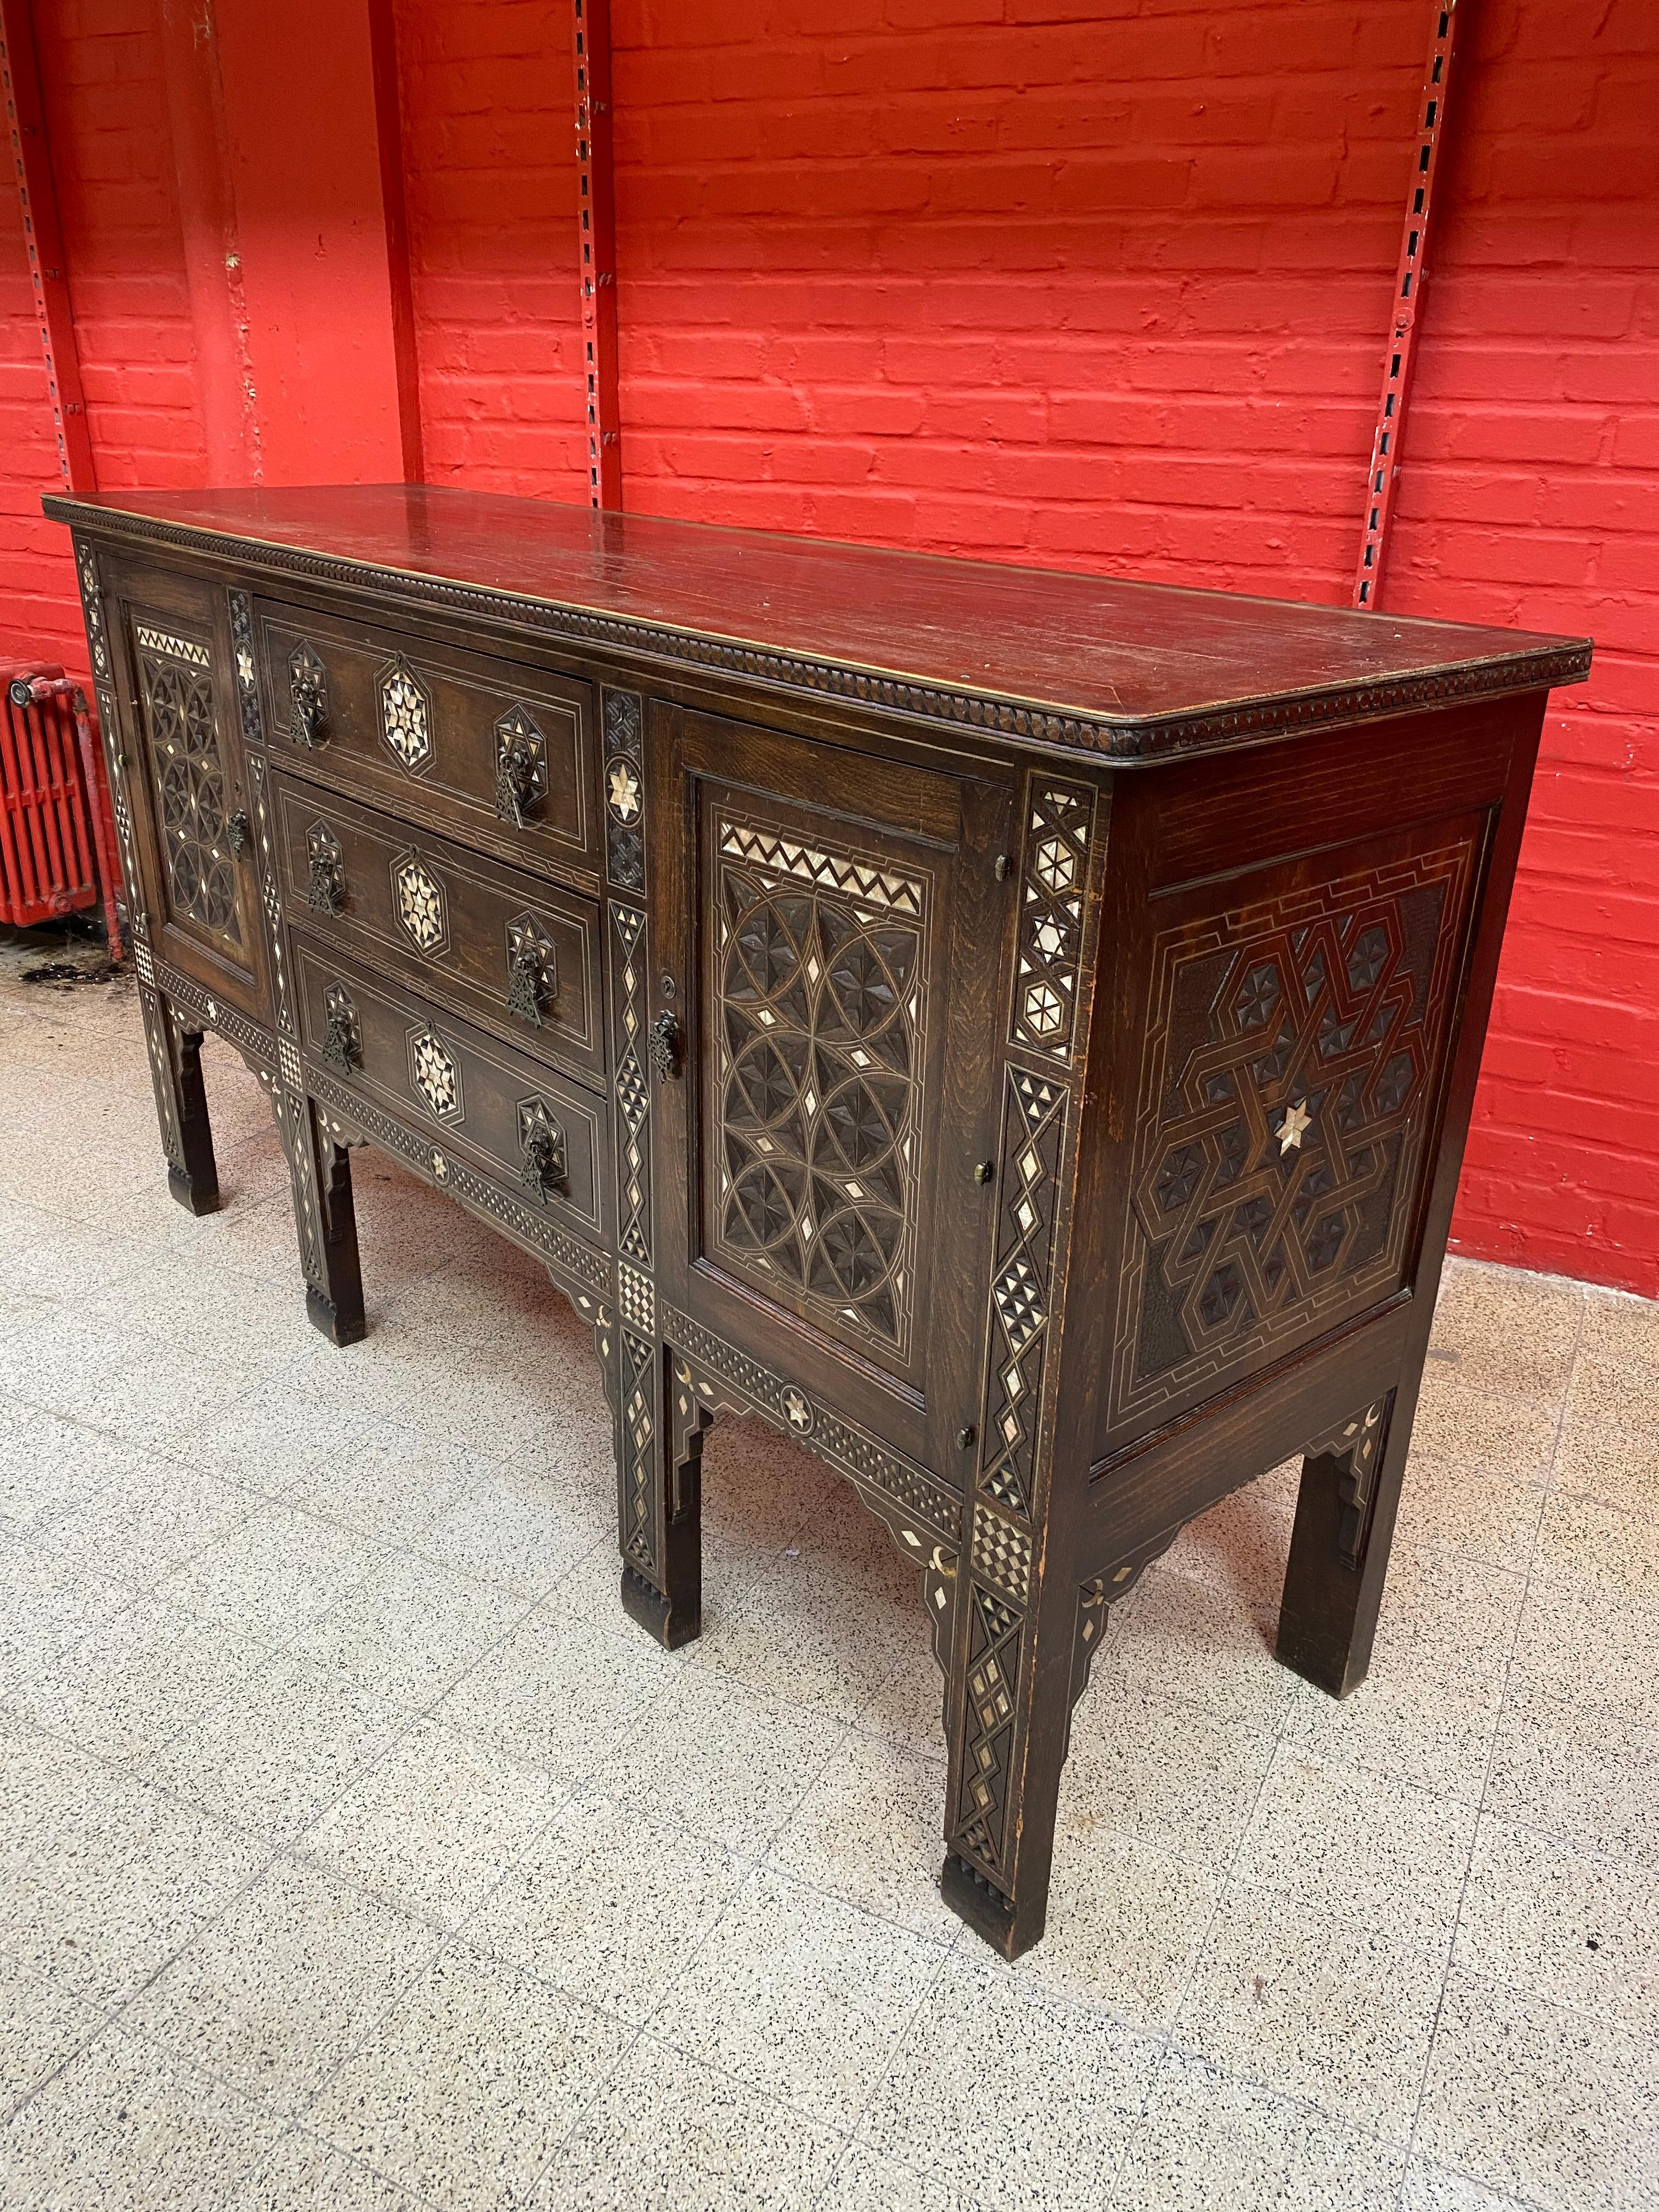 Large Oriental-Style Sideboard in carved Wood, with Mother-of-Pearl Inlay, 1880 For Sale 8